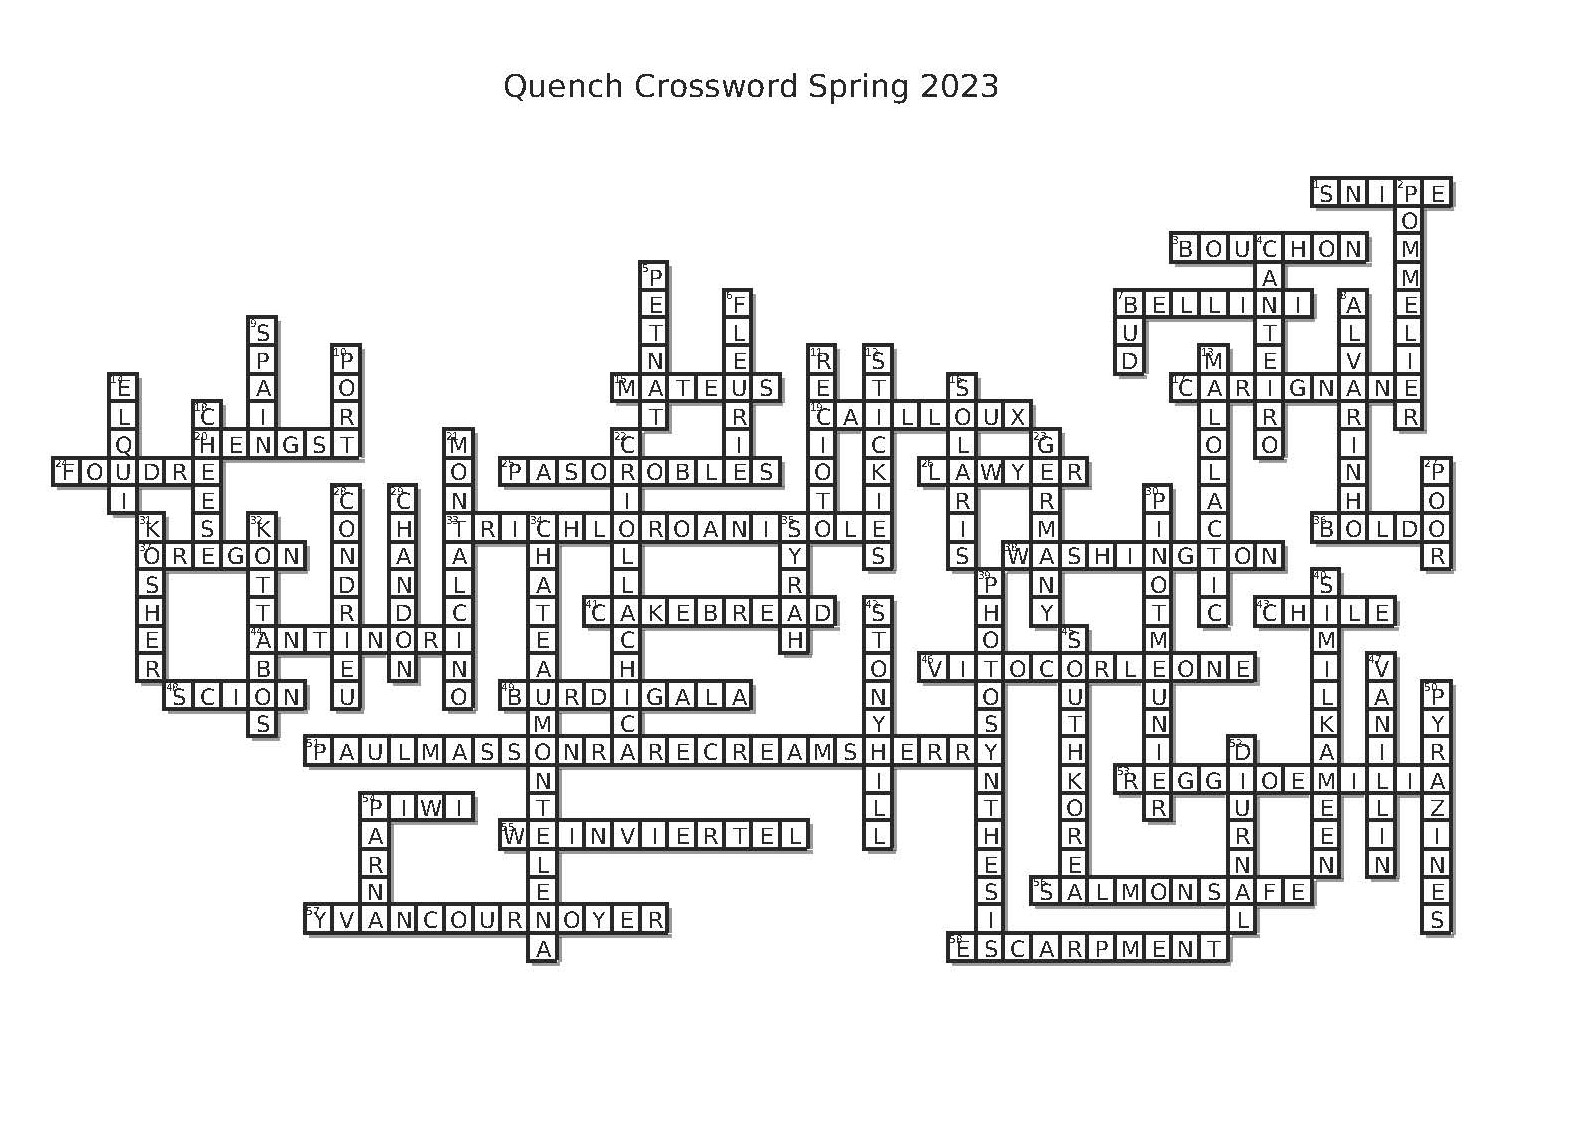 Quench Crossword Puzzle Answers Spring/Summer 2023 Quench Magazine